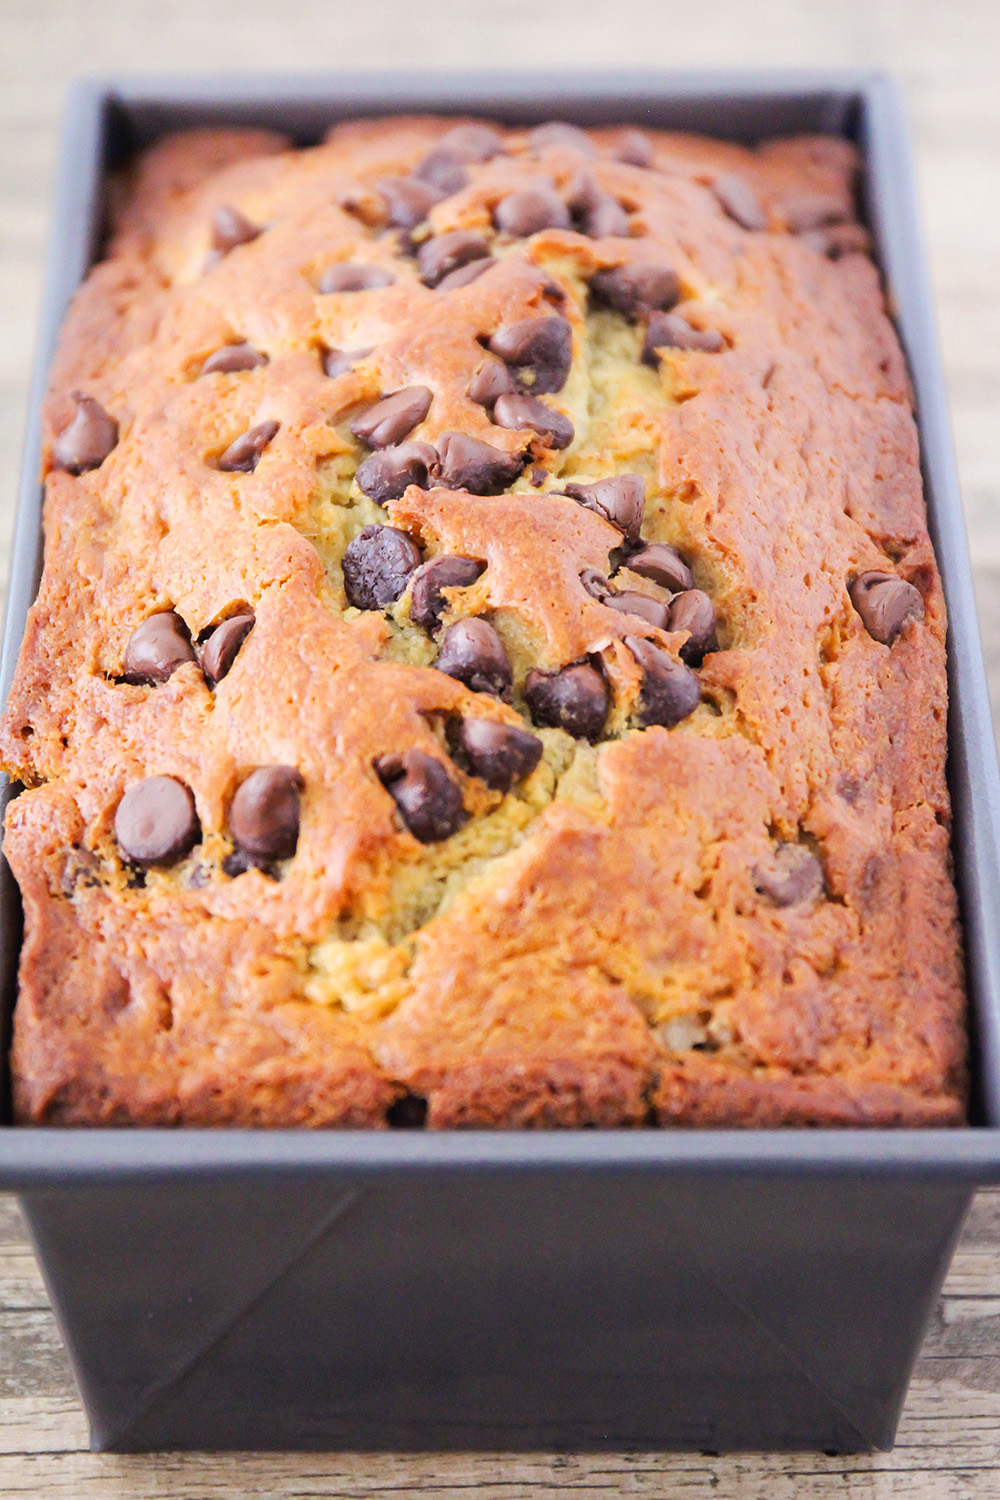 This sweet and delicious chocolate chip banana bread is loaded with chocolate flavor, and super easy to make!